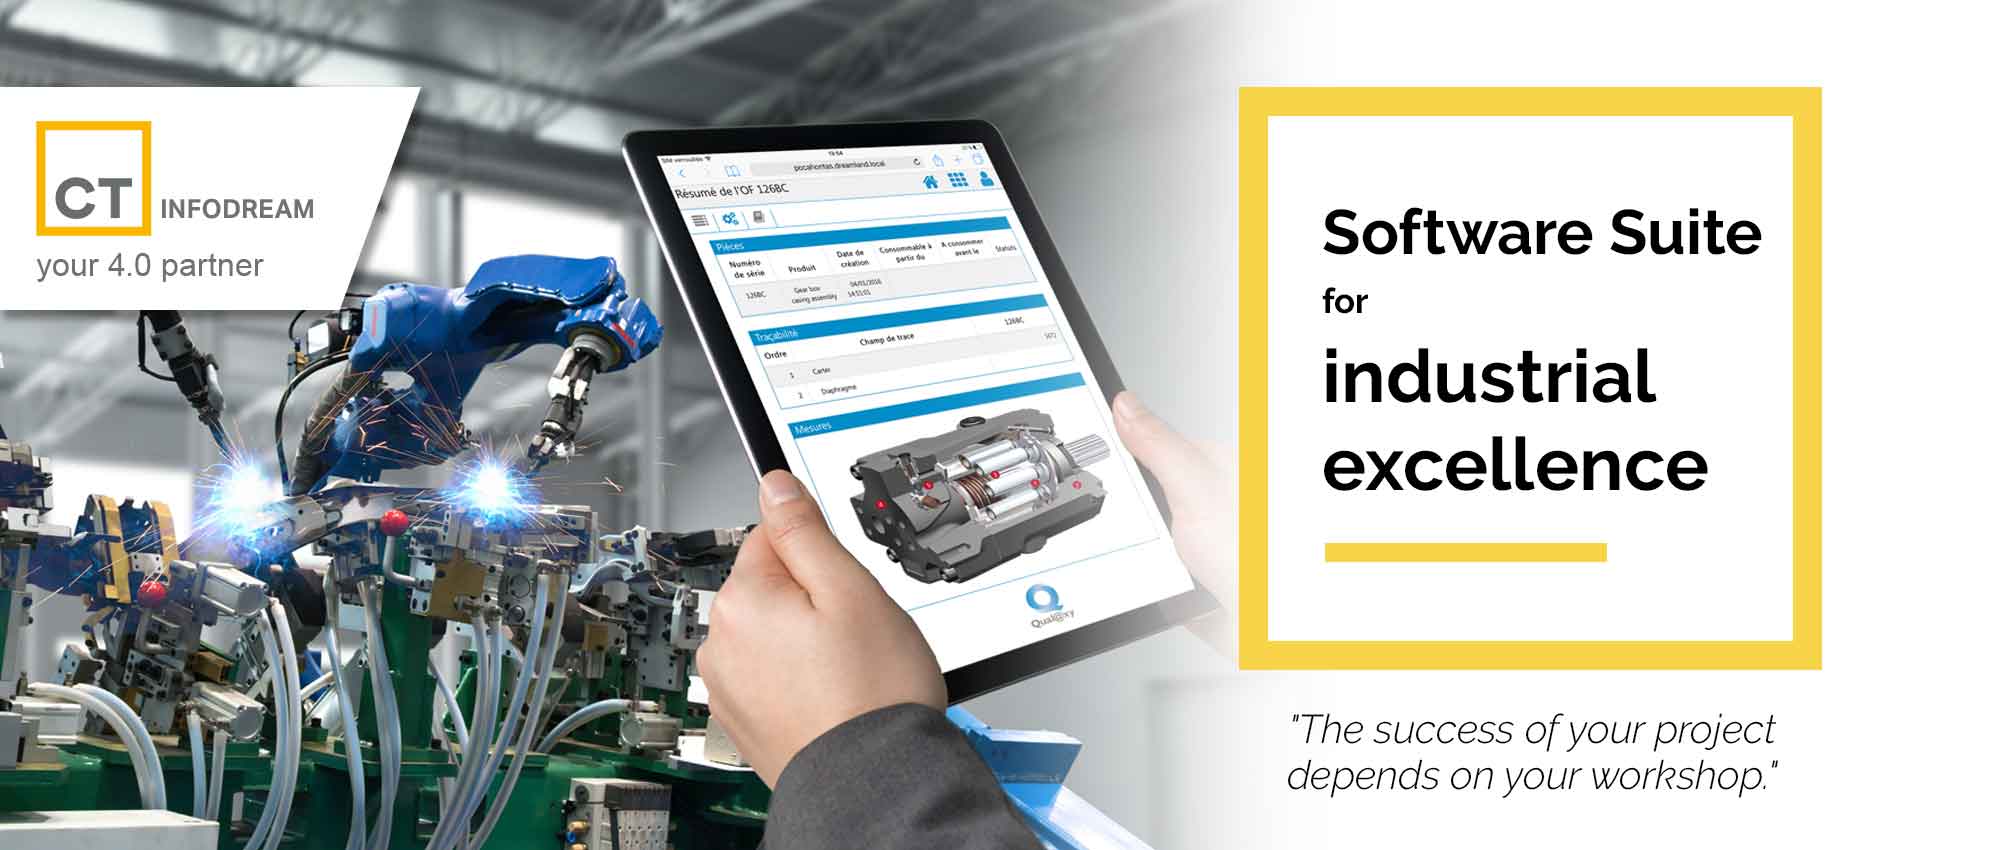 CT INFODREAM is a publisher of MES software for industrial excellence.